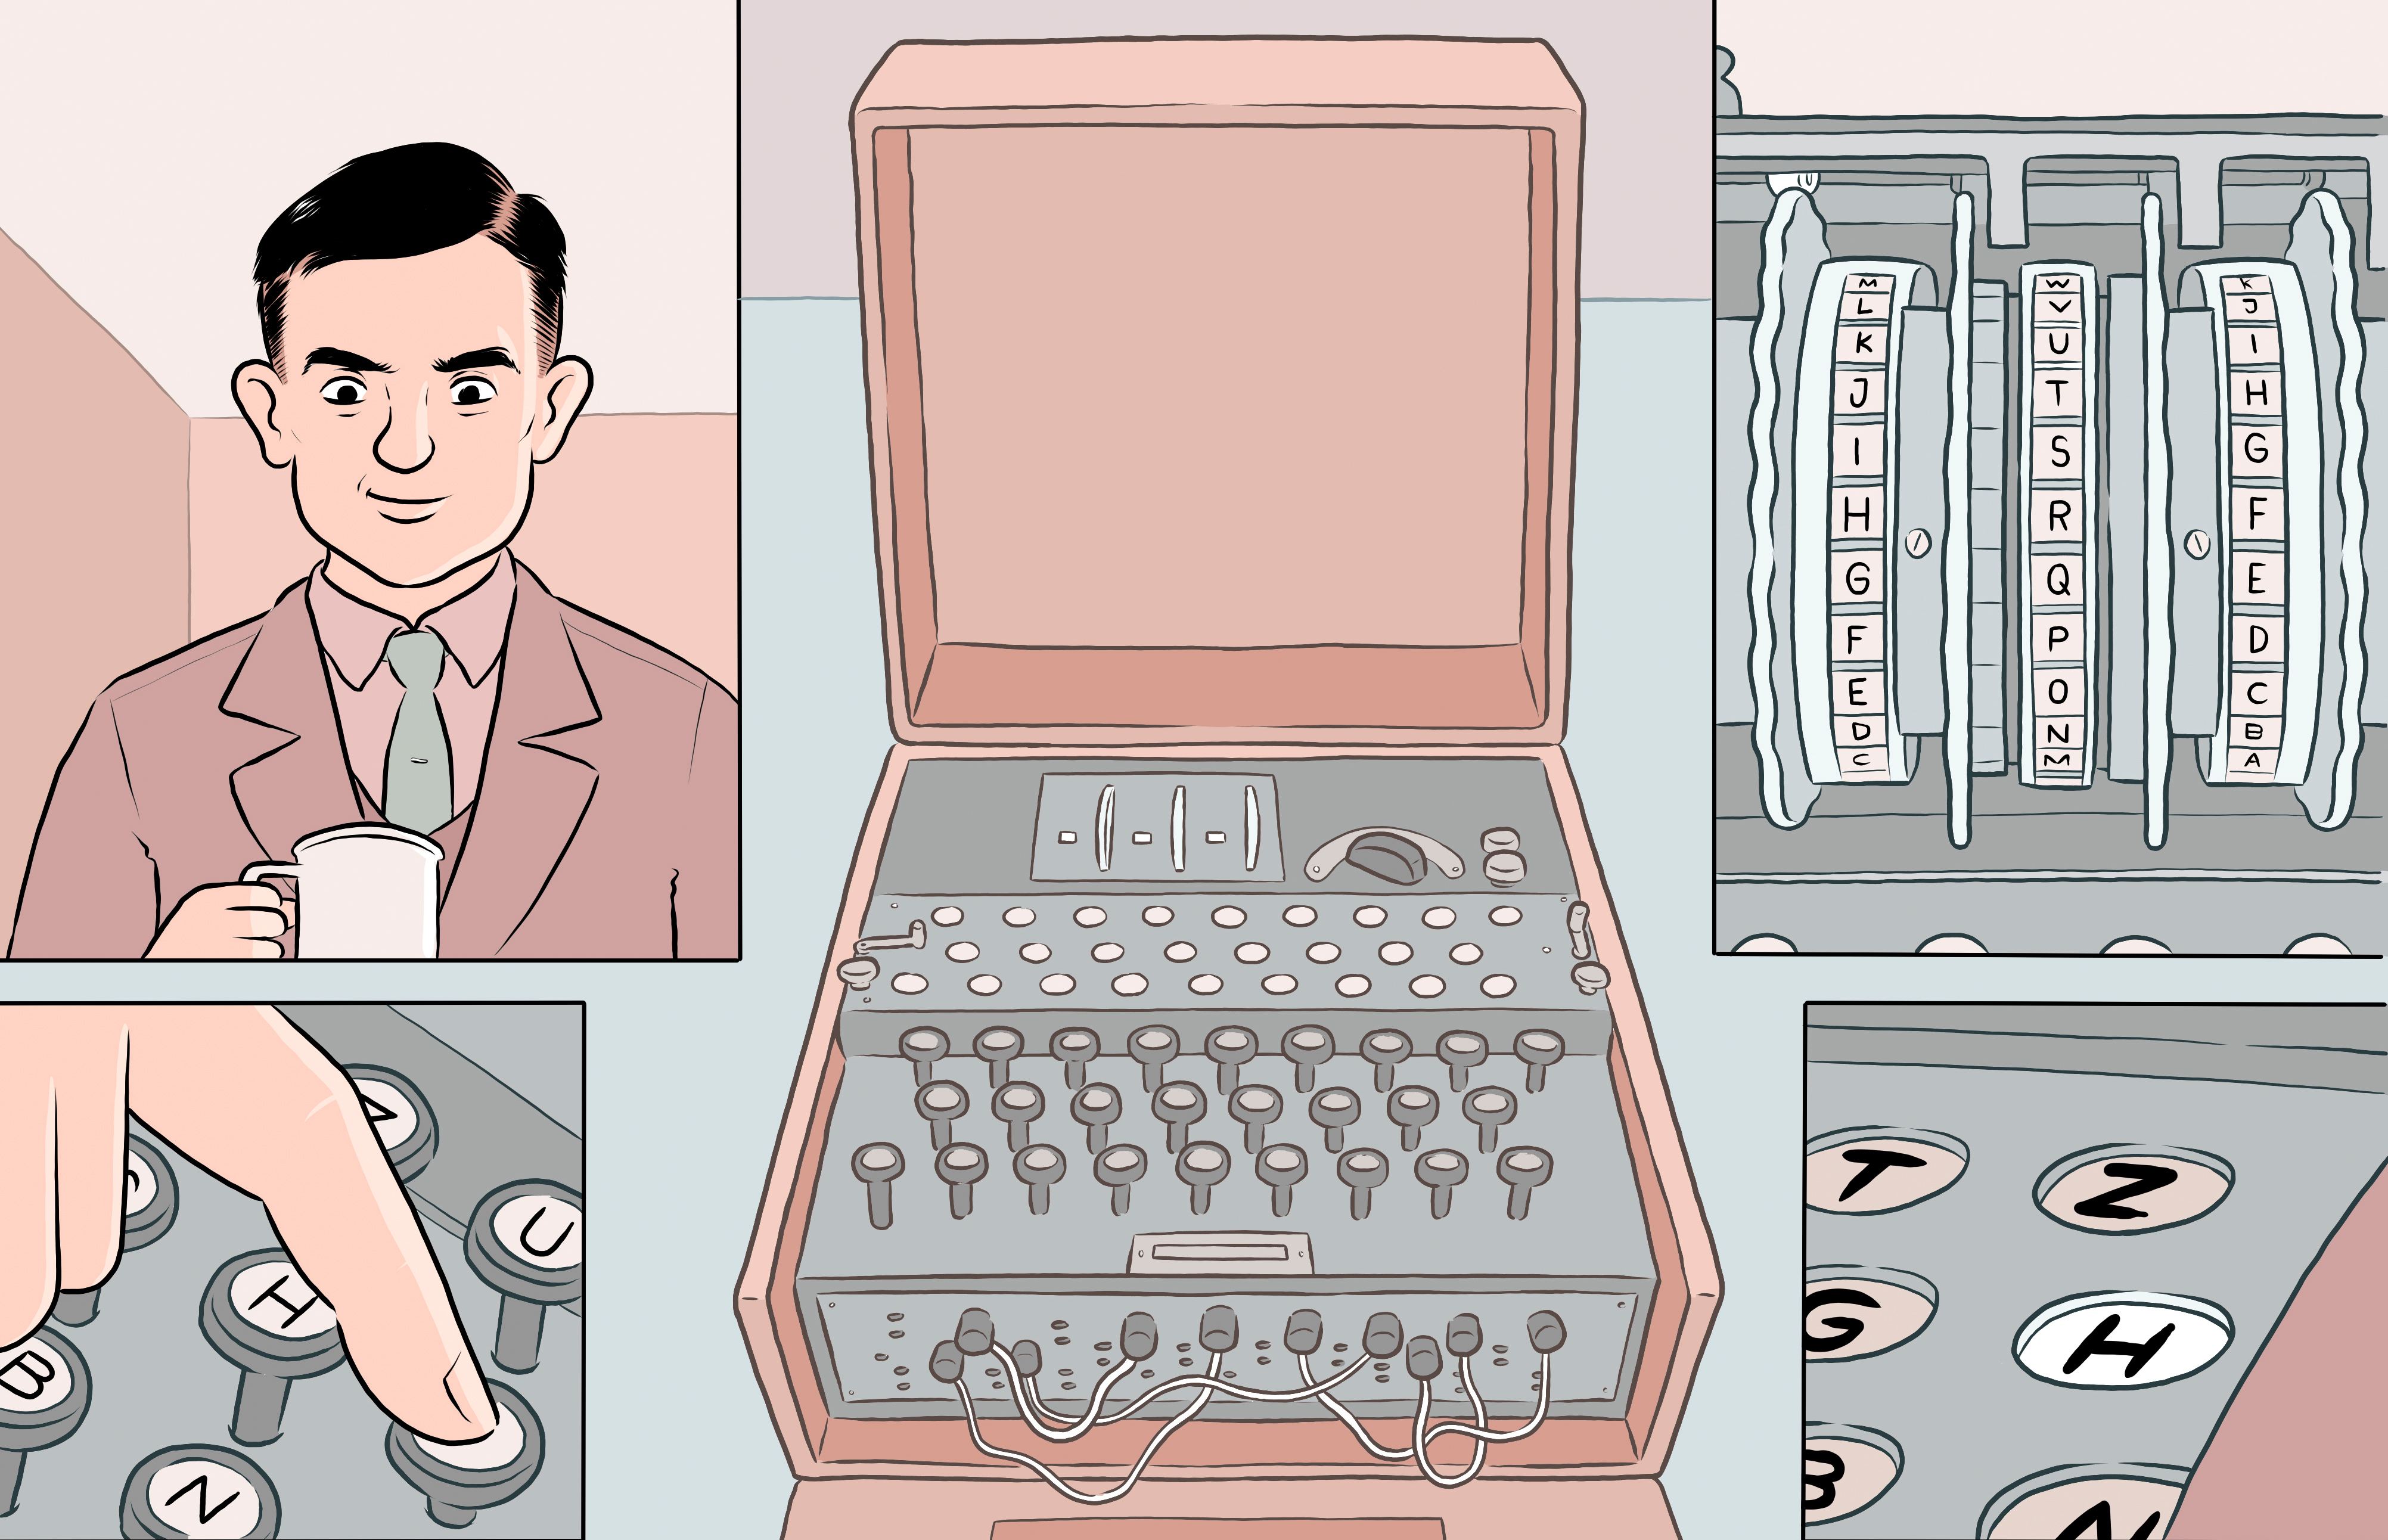 Illustration of Alan Turing and the Enigma Machine